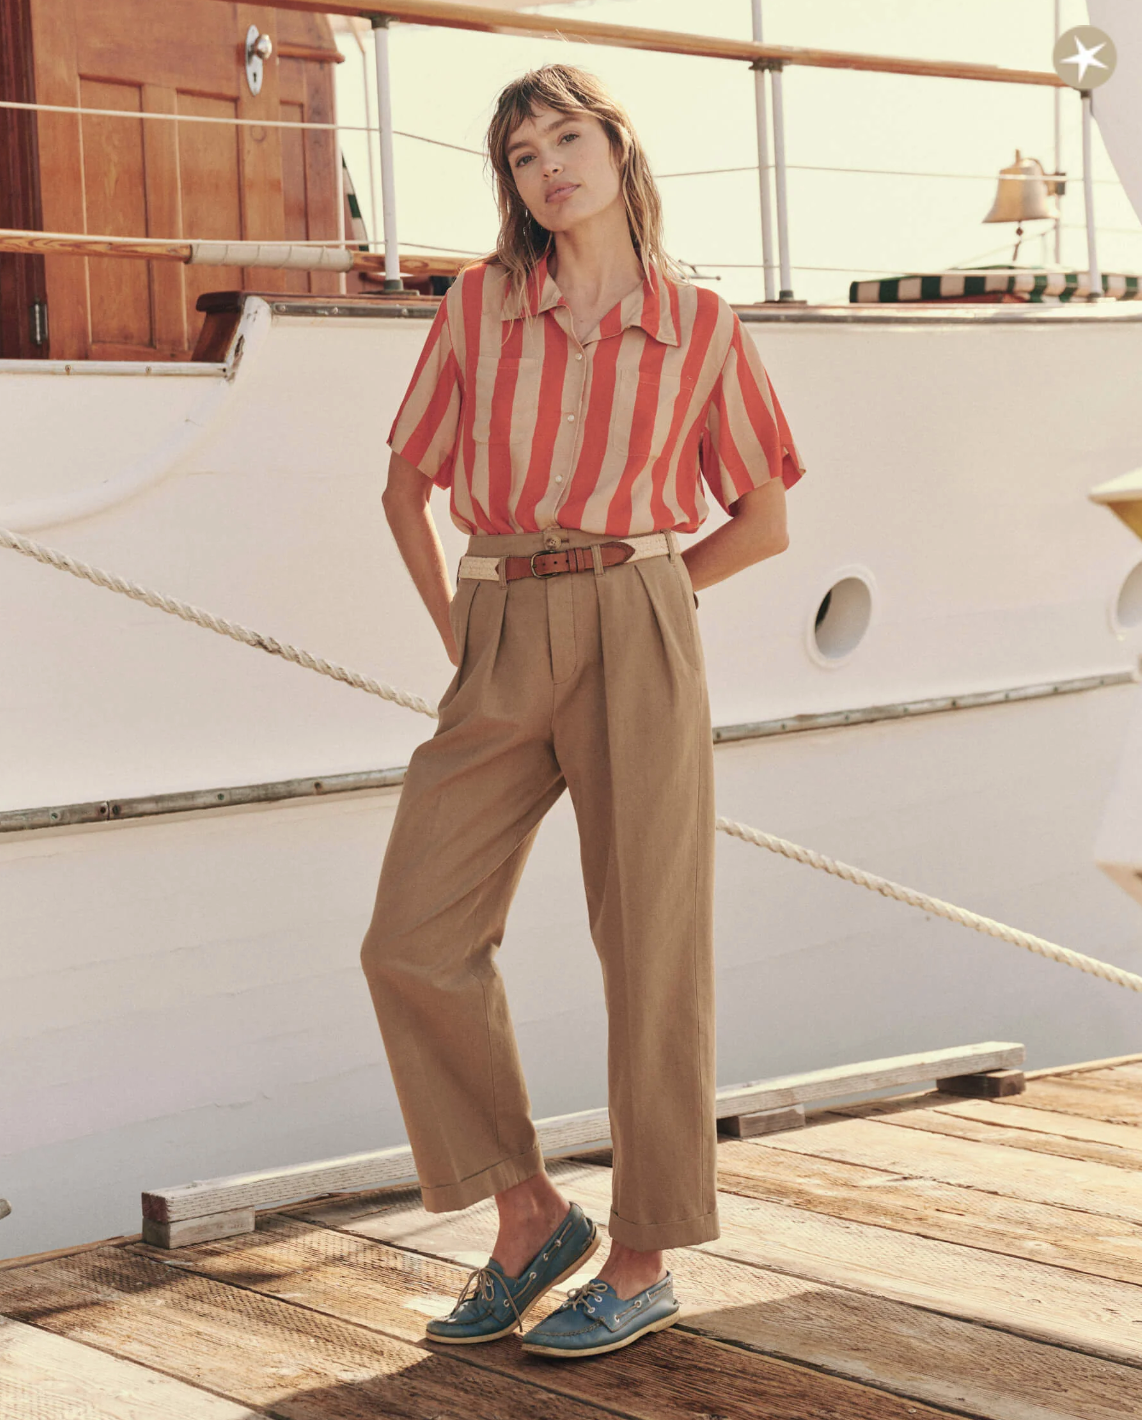 A woman stands on a wooden deck in front of a boat, wearing a short-sleeved, red and white striped The Bowling Shirt by The Great Inc. tucked into high-waisted, tan trousers. Her relaxed fit outfit is completed with teal boat shoes. She gazes off to the side with a relaxed expression.